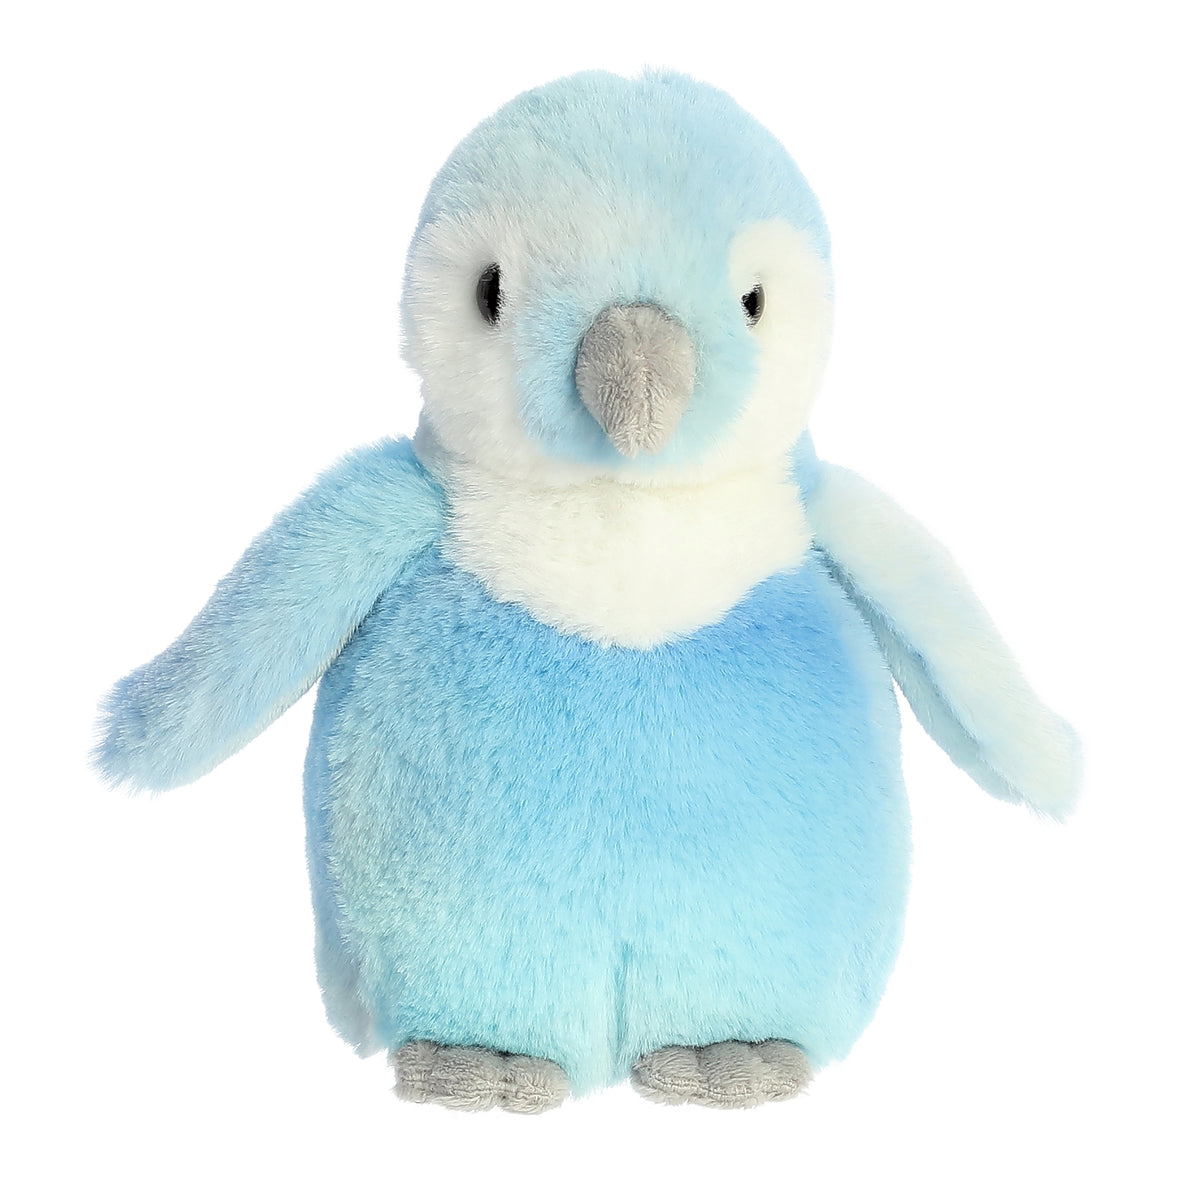 Adorable Rainbow Baby Penguin plush showcasing a spectrum of blue hues and a bright white face, embodying enchanting charm.